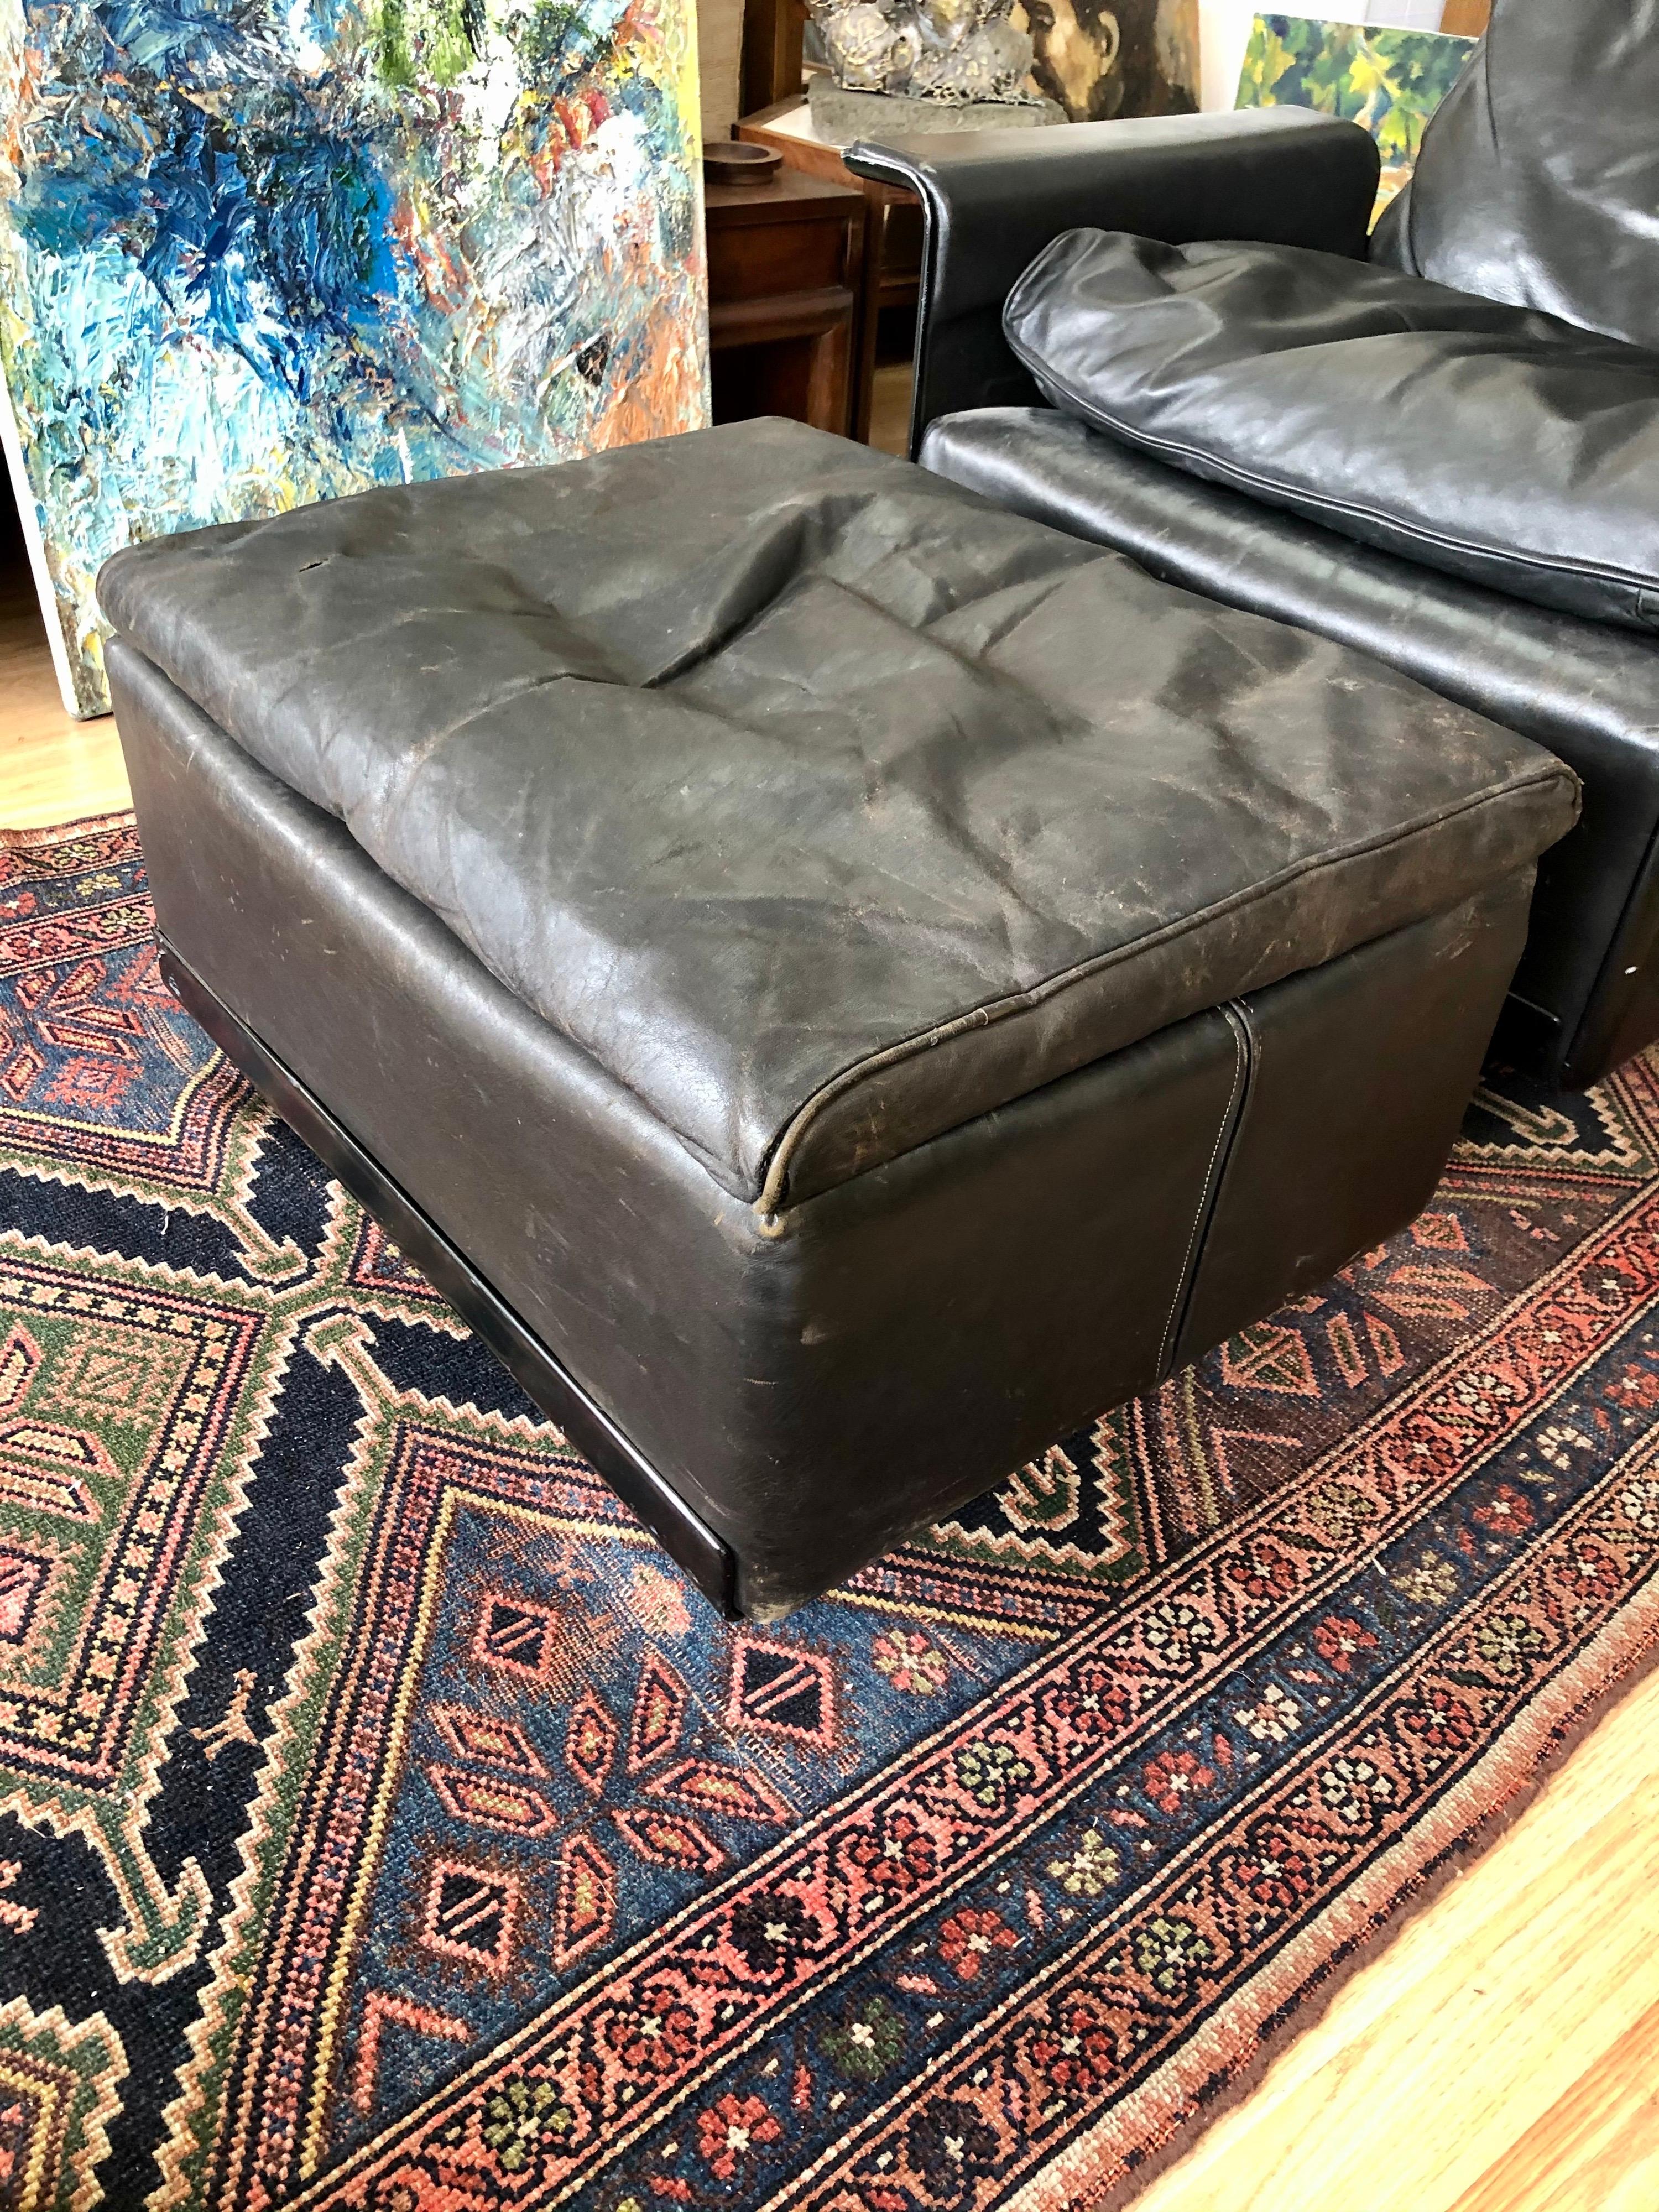 This vintage lounge chair and ottoman are in overall good condition. Designed by Dieter Rams for Vitsoe. It's the first version of this model in all black. Very comfortable,
1970s, England.
Dimensions:
Height 35.44 in. (90 cm)
Width 33.86 in.